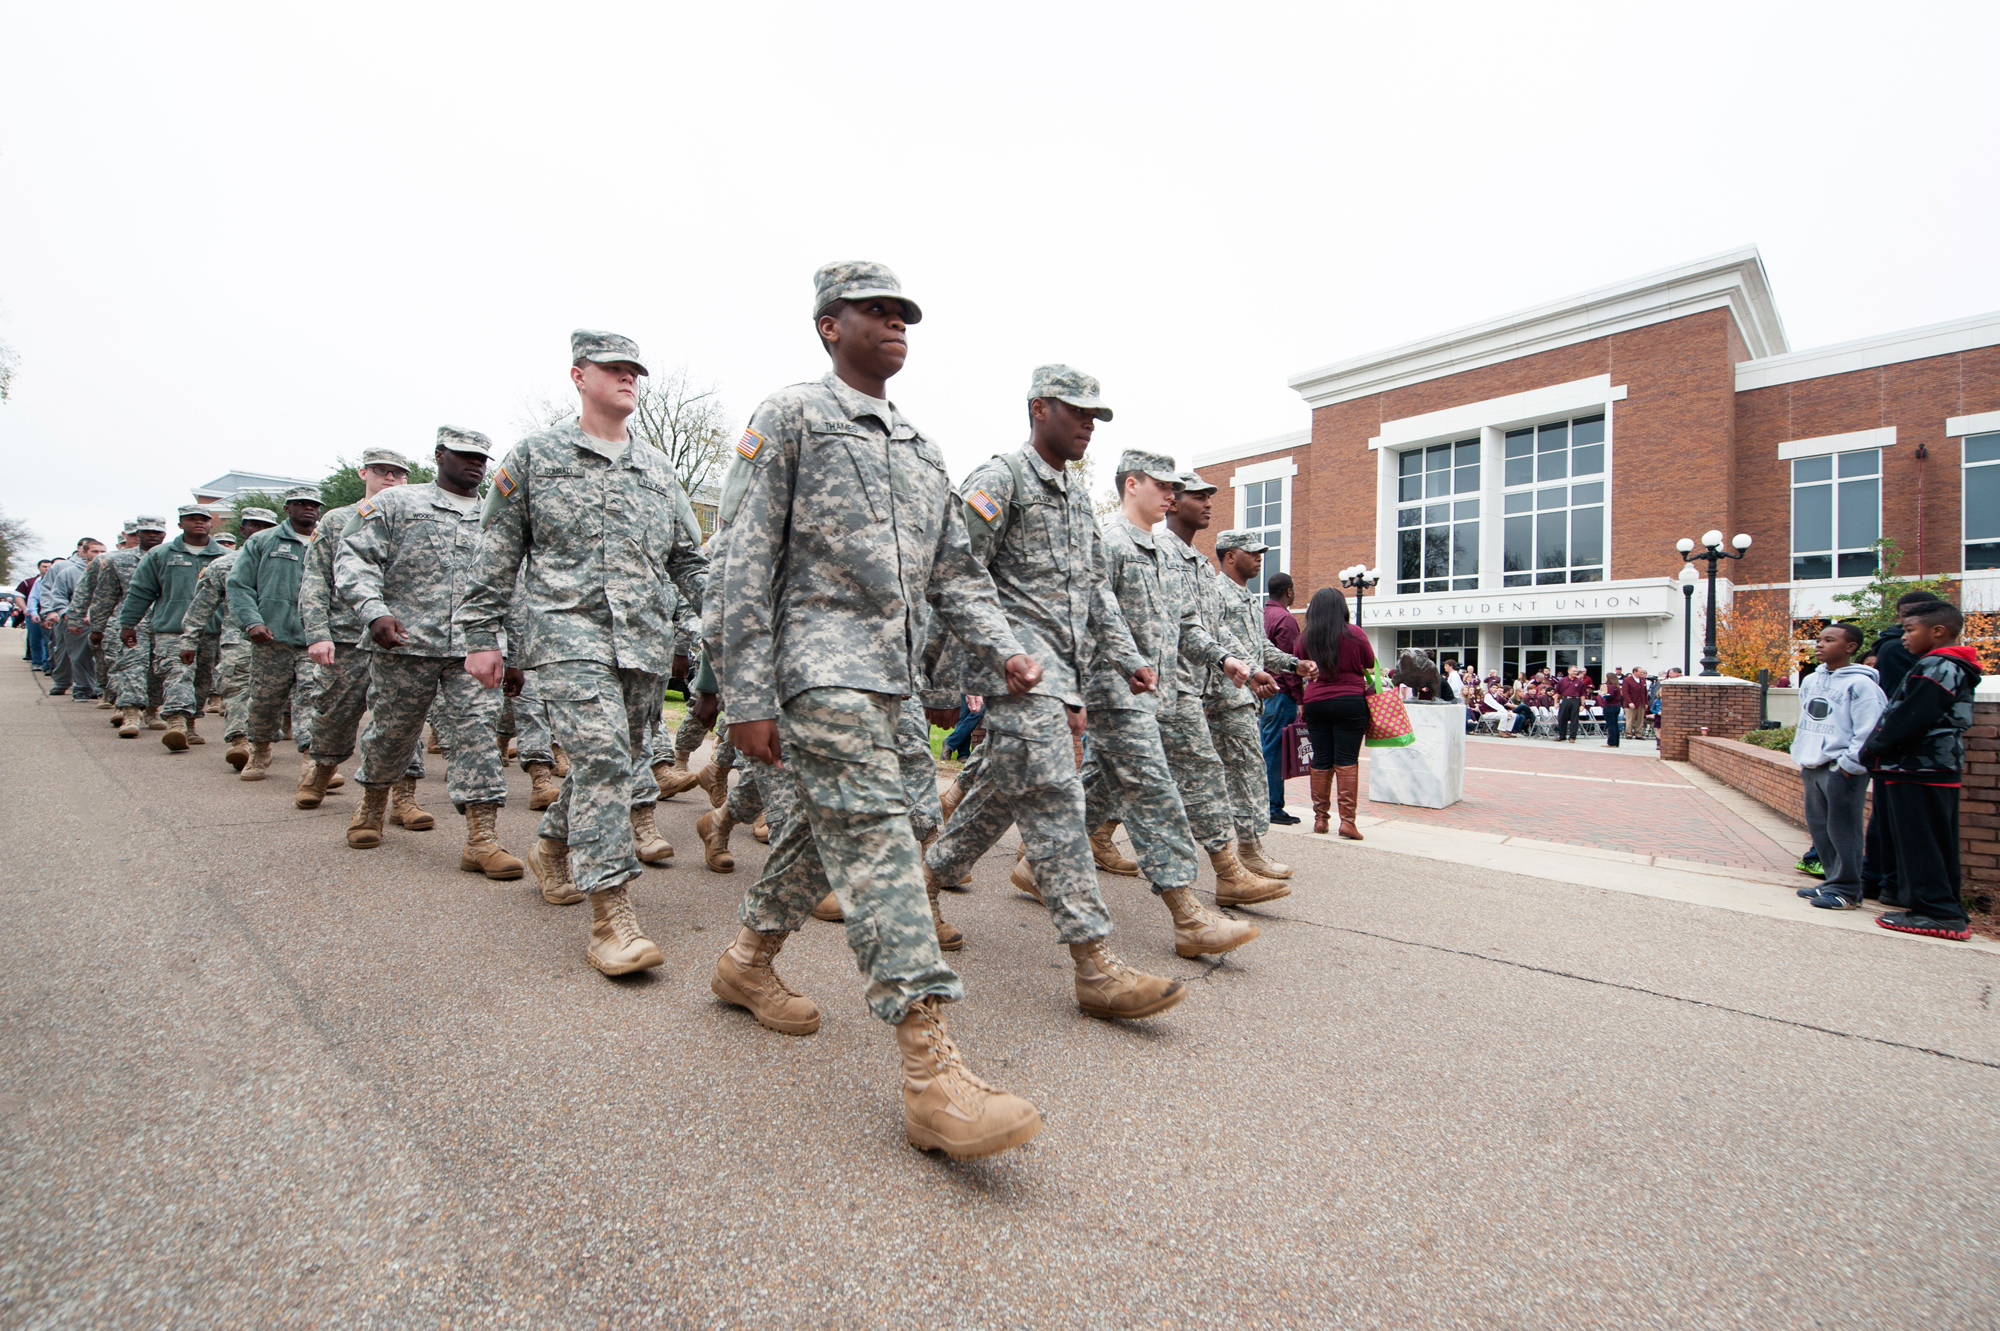 "Best for Vets" rankings, released this week by "Military Times," puts Mississippi State in the top 50 in the nation for services offered to military personnel and veterans. Here, Army ROTC members march in front of Colvard Student Union as they prepare to become lieutenants for the active Army, National Guard, and U.S. Army Reserves. The university also offers Air Force ROTC, which also prepares members to become commissioned officers.<br />
